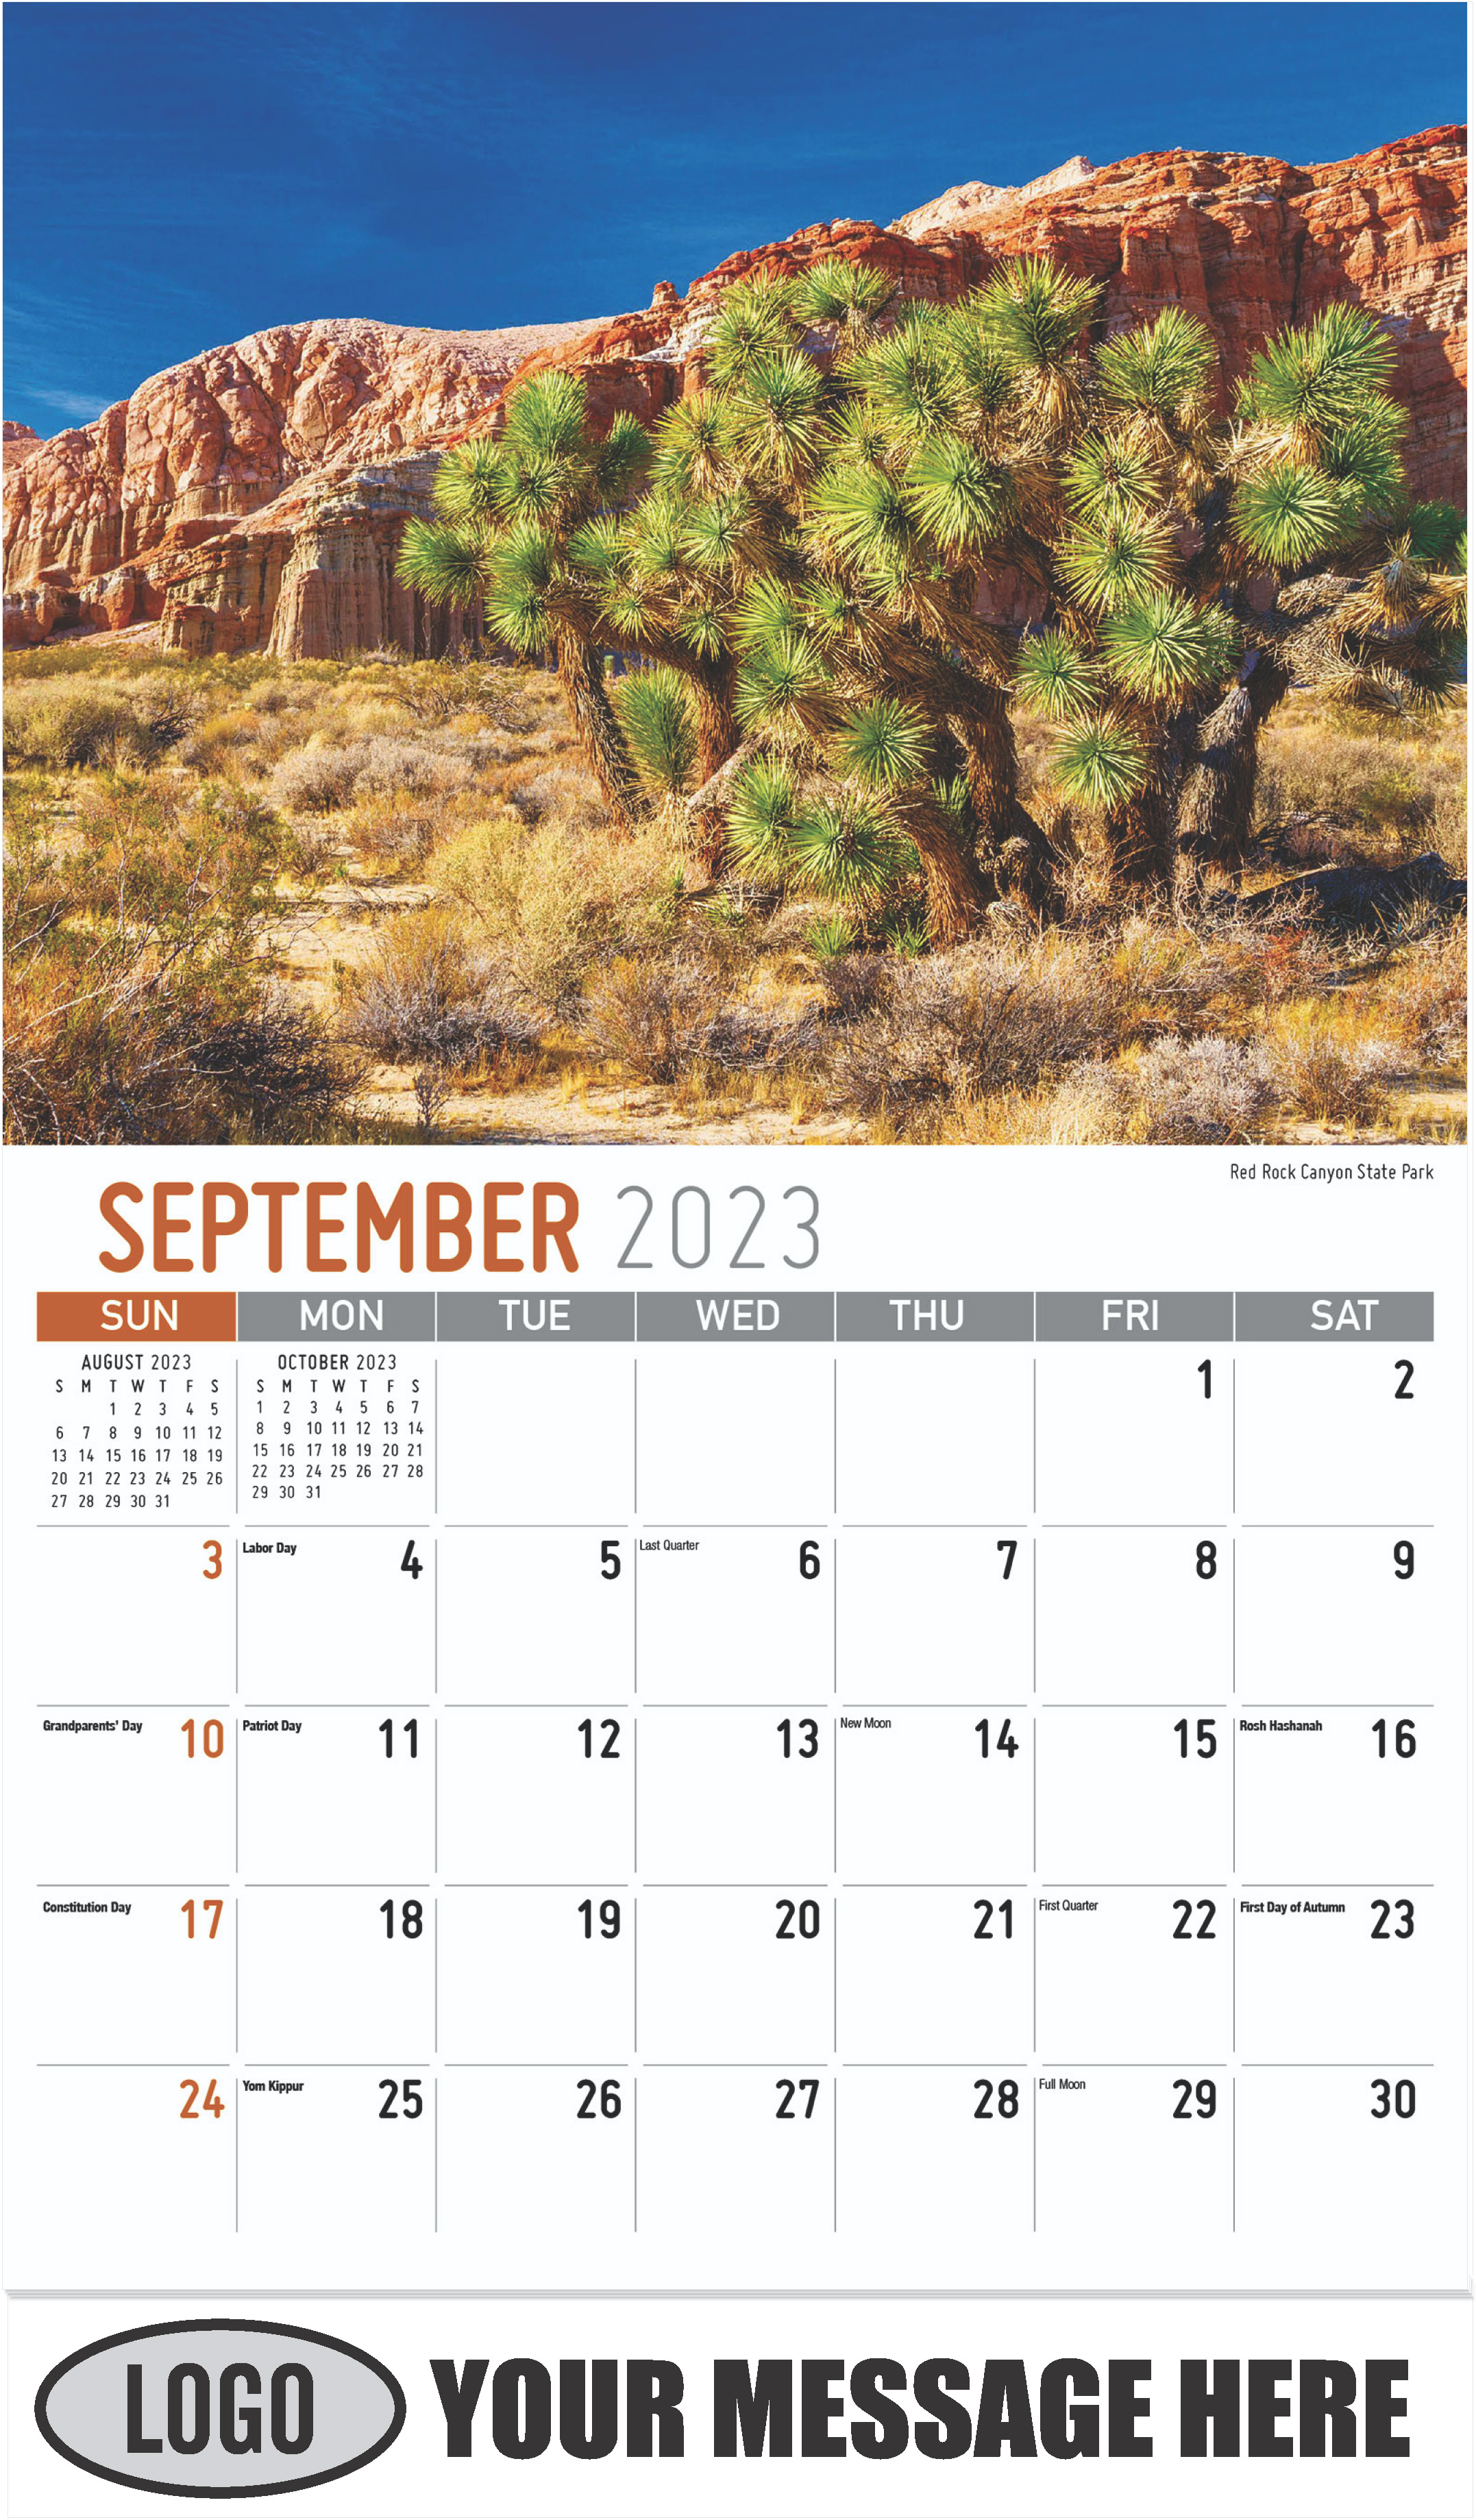 Red Rock Canyon State Park - September - Scenes of California 2023 Promotional Calendar